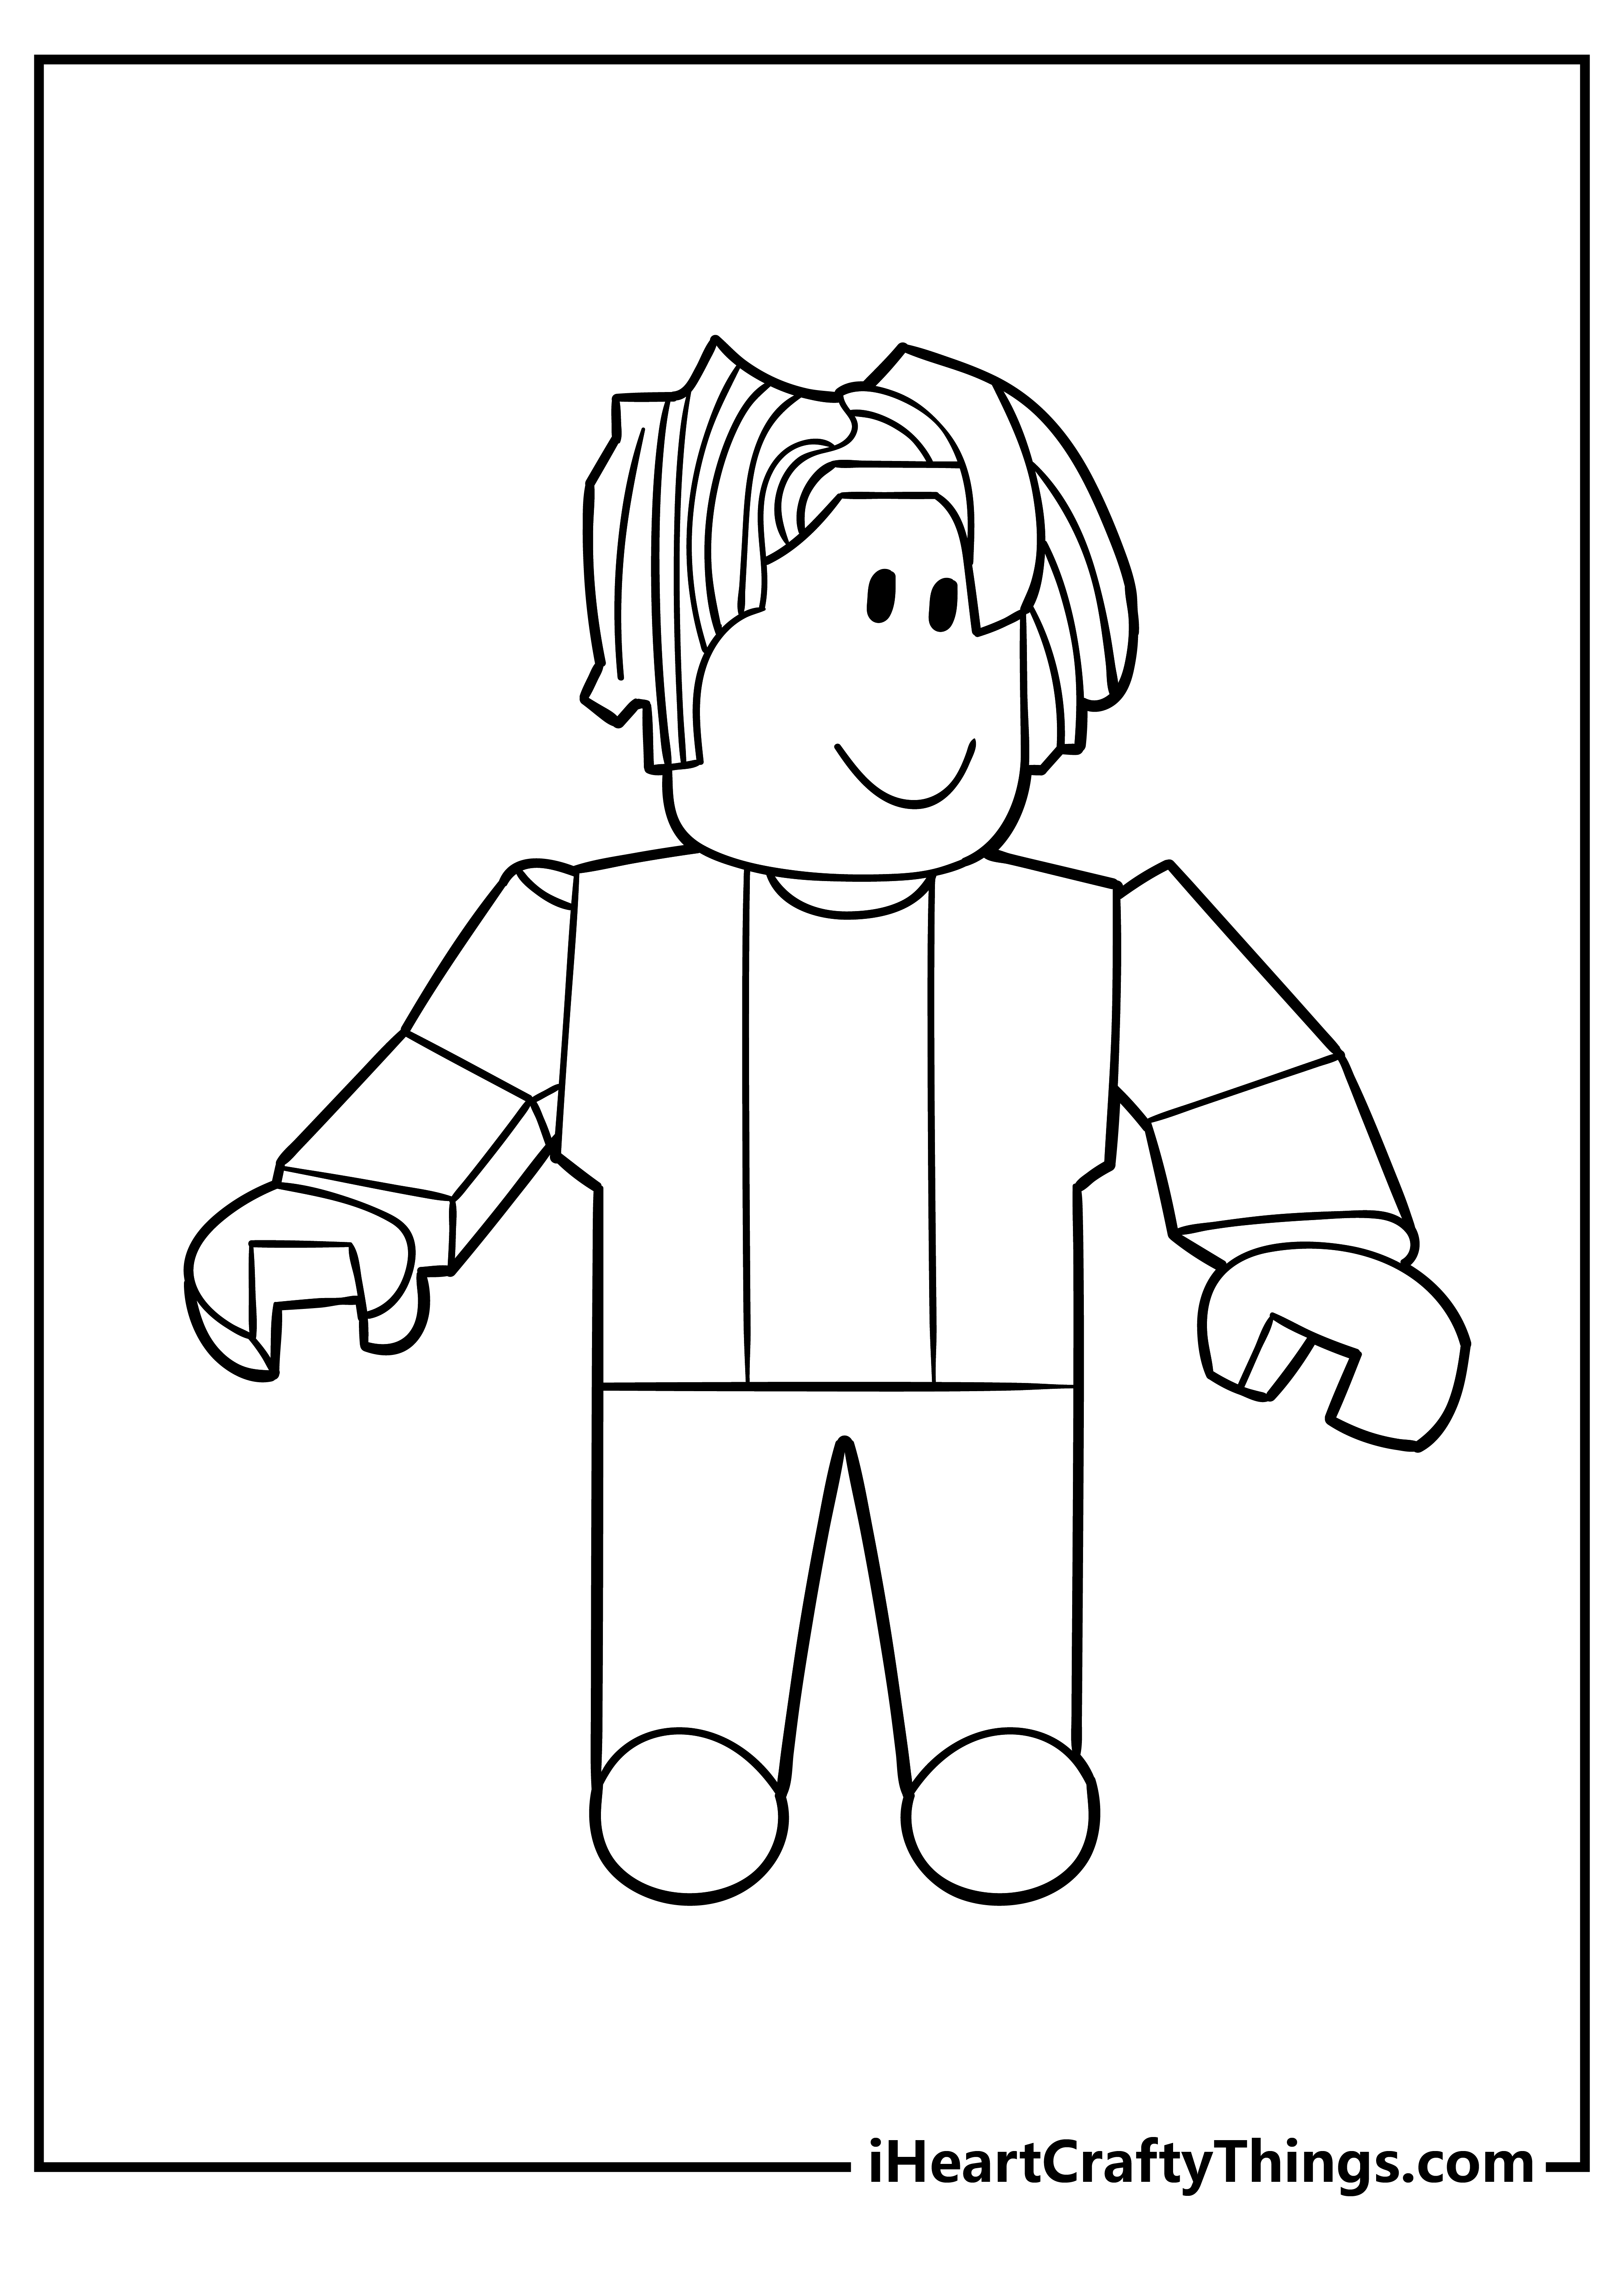 Roblox coloring pages coloring pages for boys coloring pages cute doodles drawings